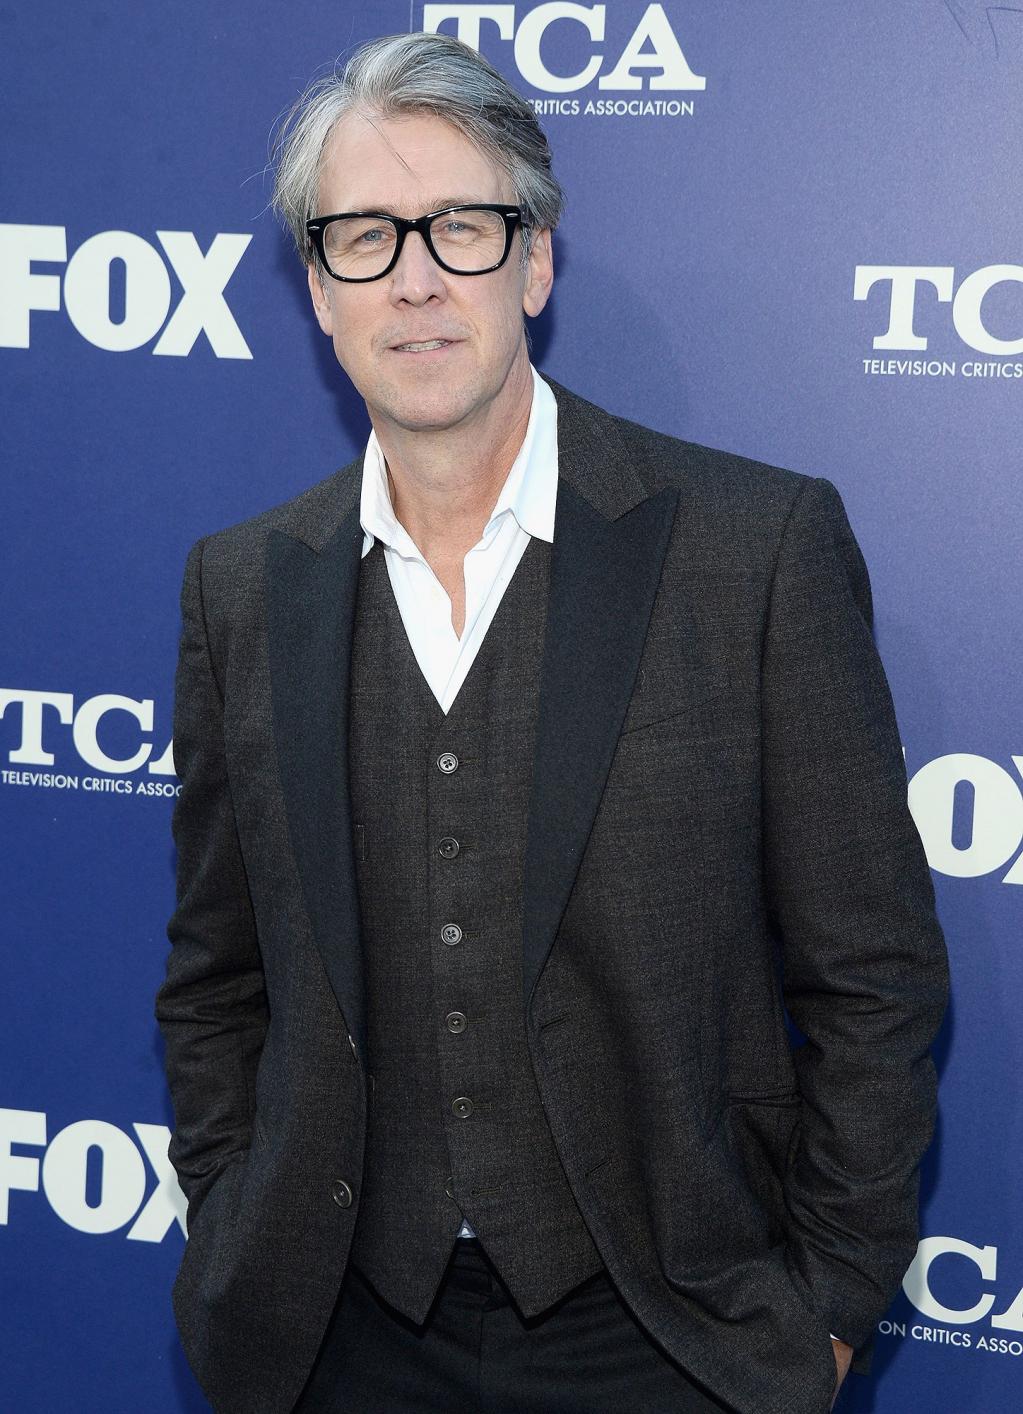 Alan Ruck Opens Up About    Being Blindsided       '  and Nearly Brain-Damaged       '  by a Life-Threatening Illness